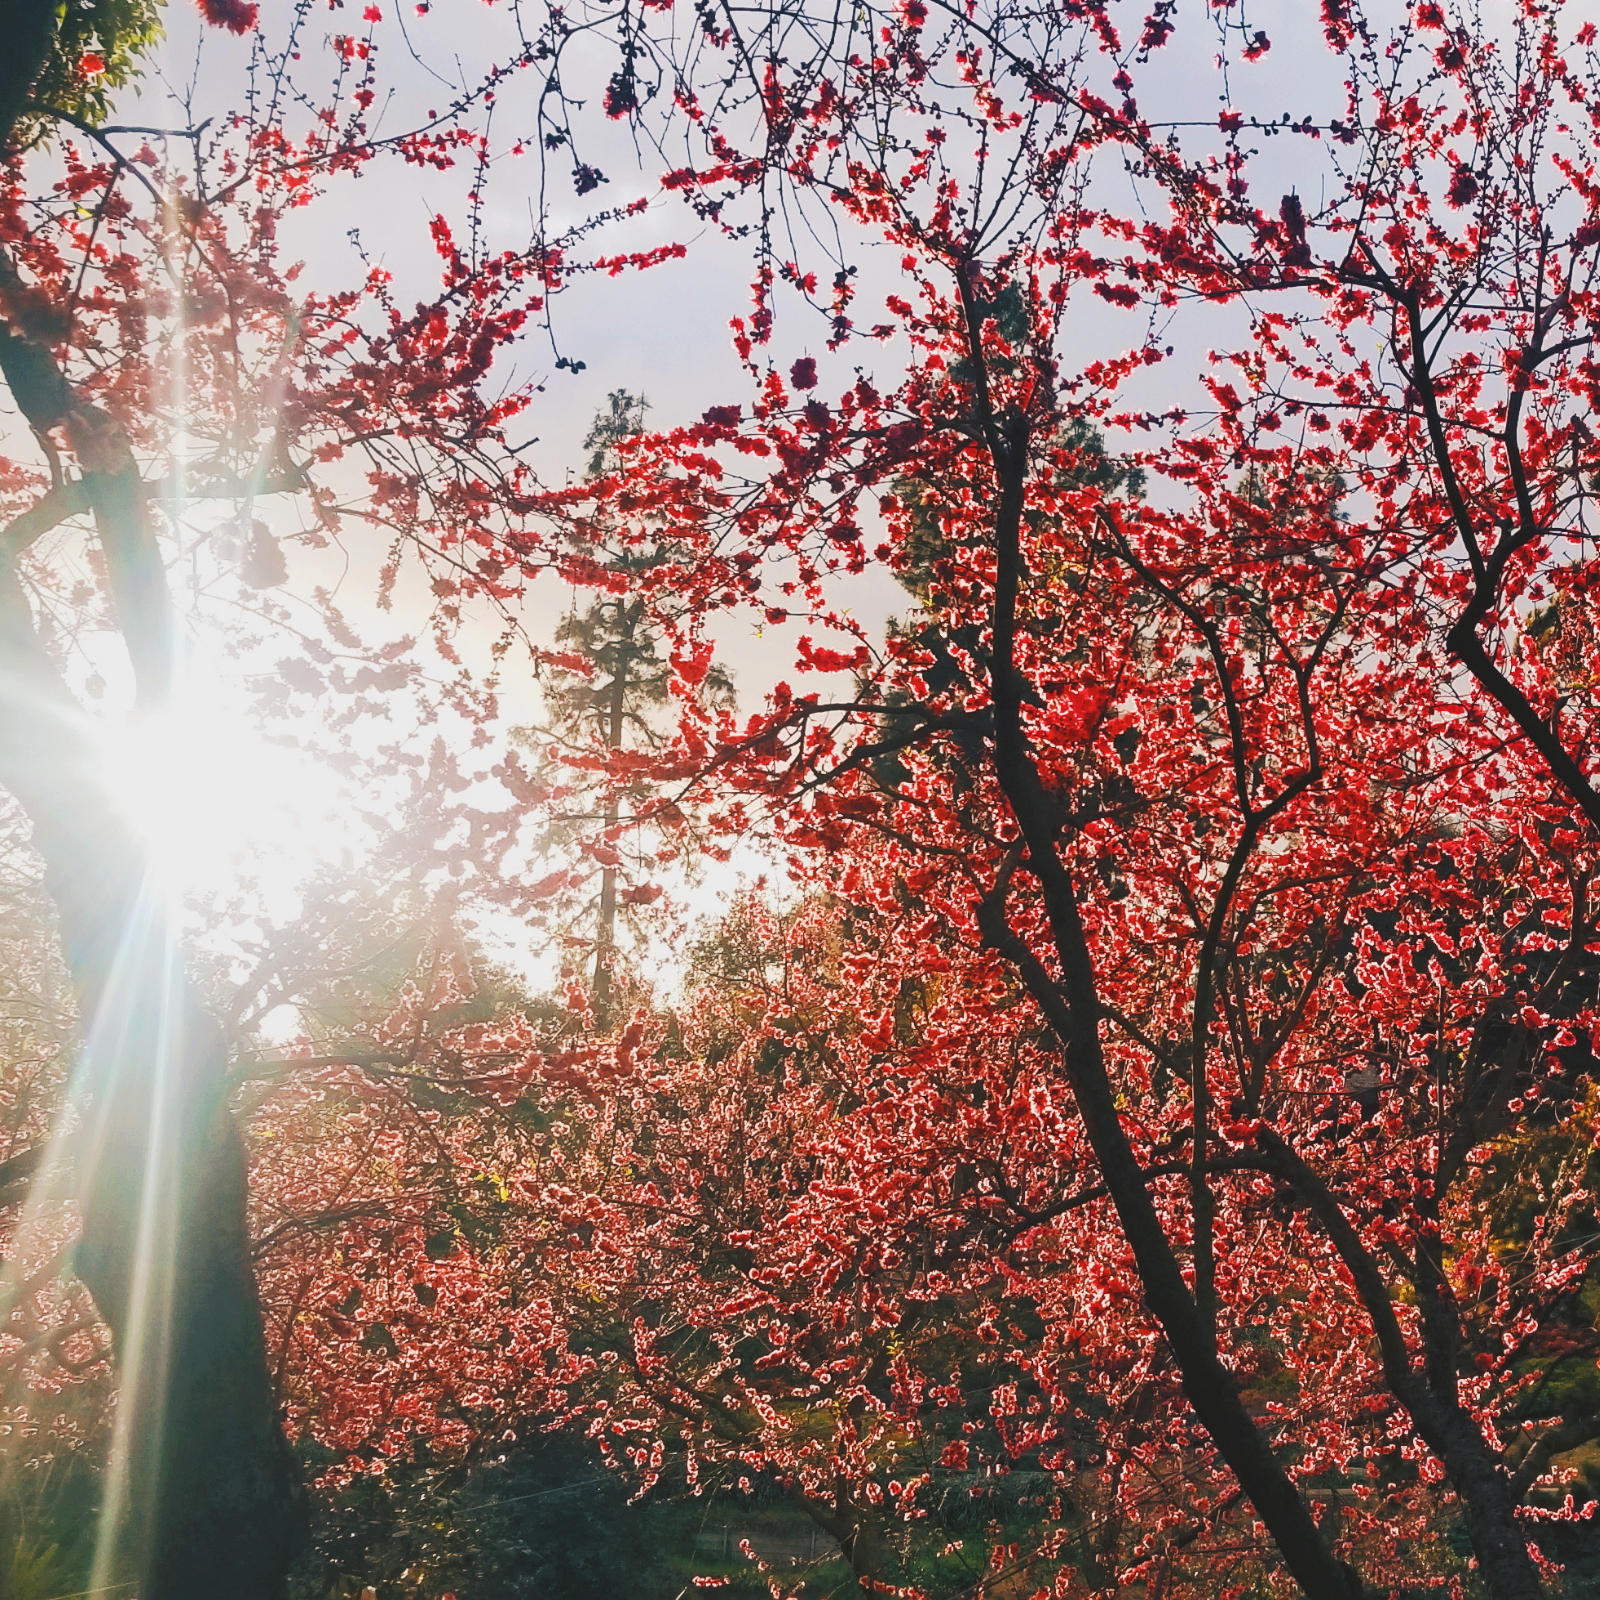 Sun coming through a tree with pink blooms